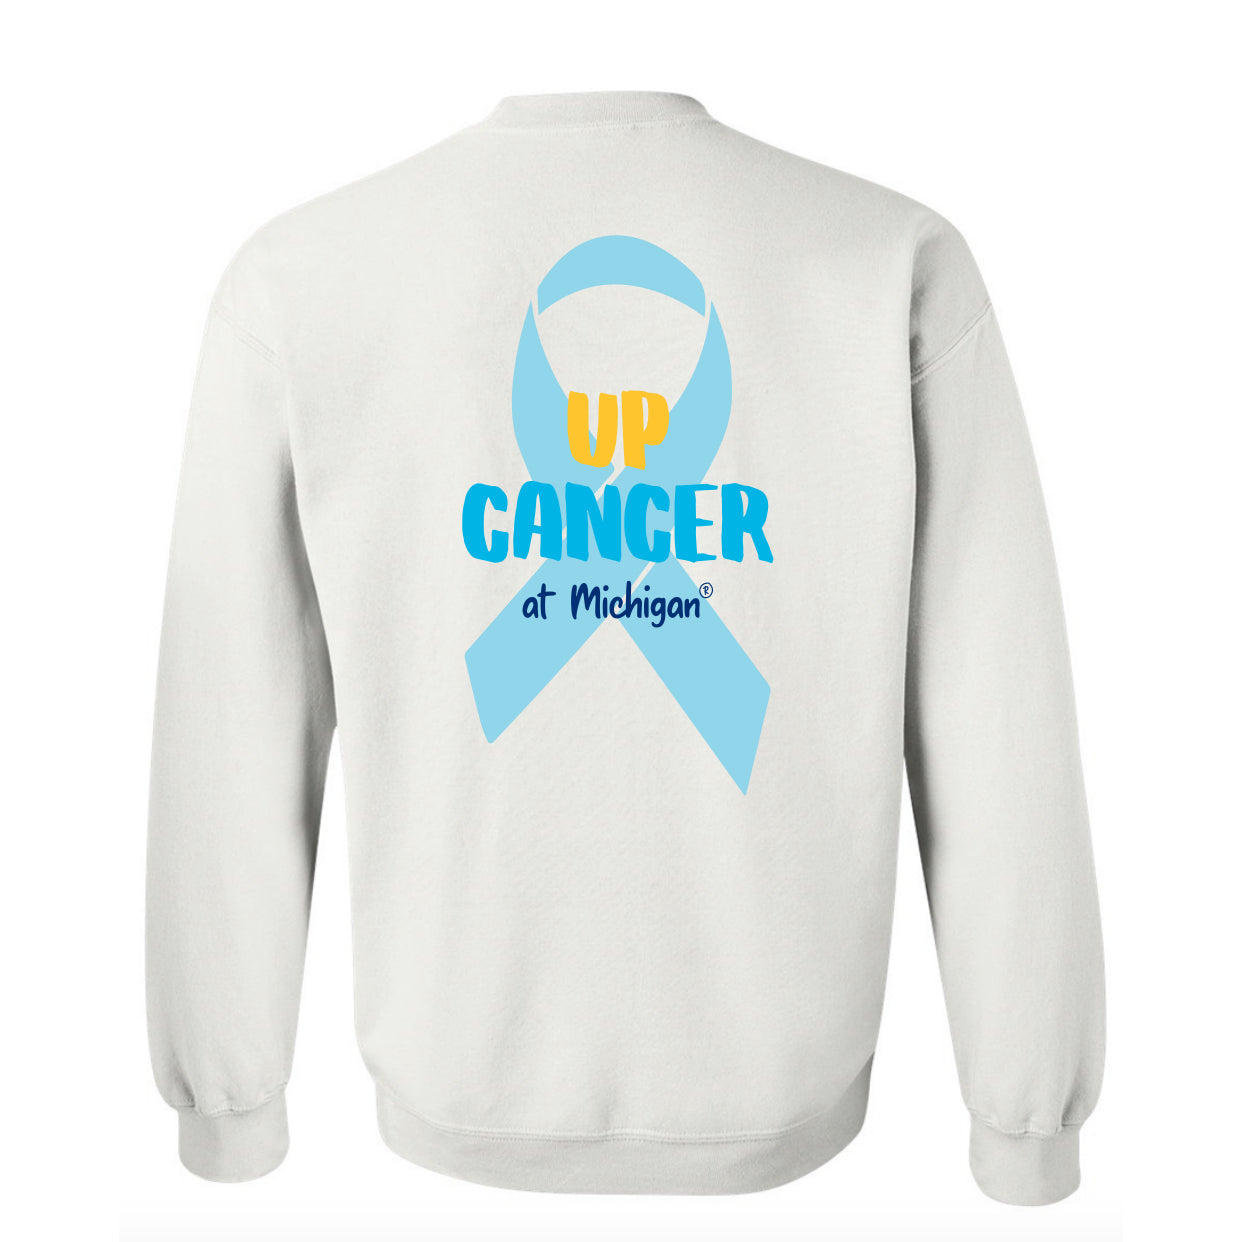 Up Cancer White Ribbon Crew (Listing ID: 6582543810629)